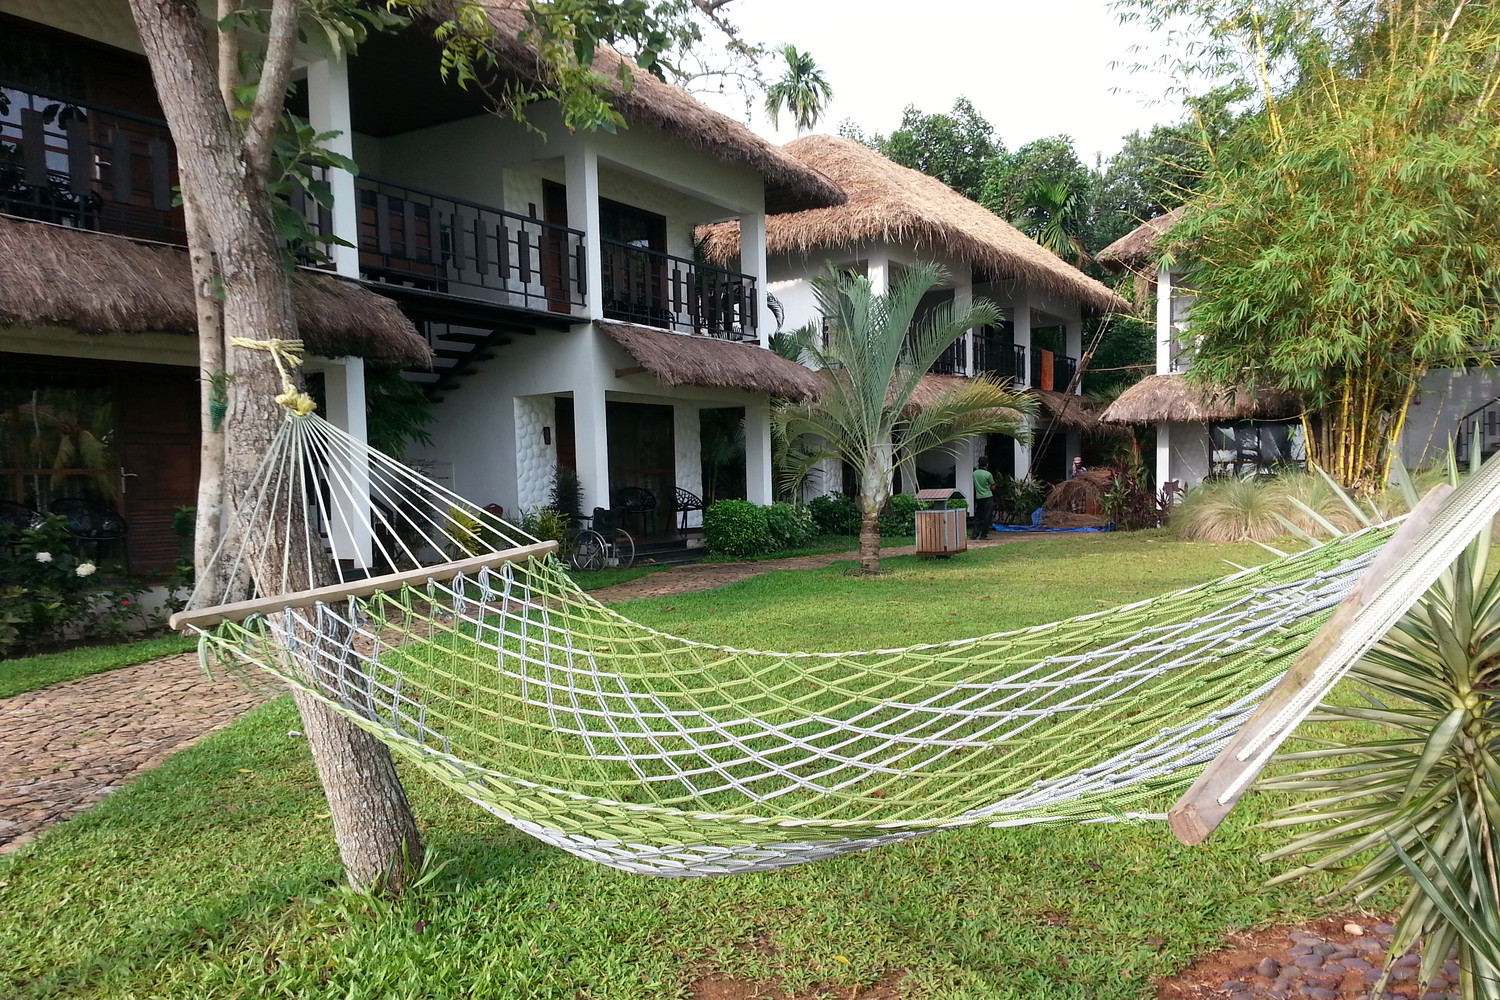 An empty hammock at a lawn with hotel rooms behind